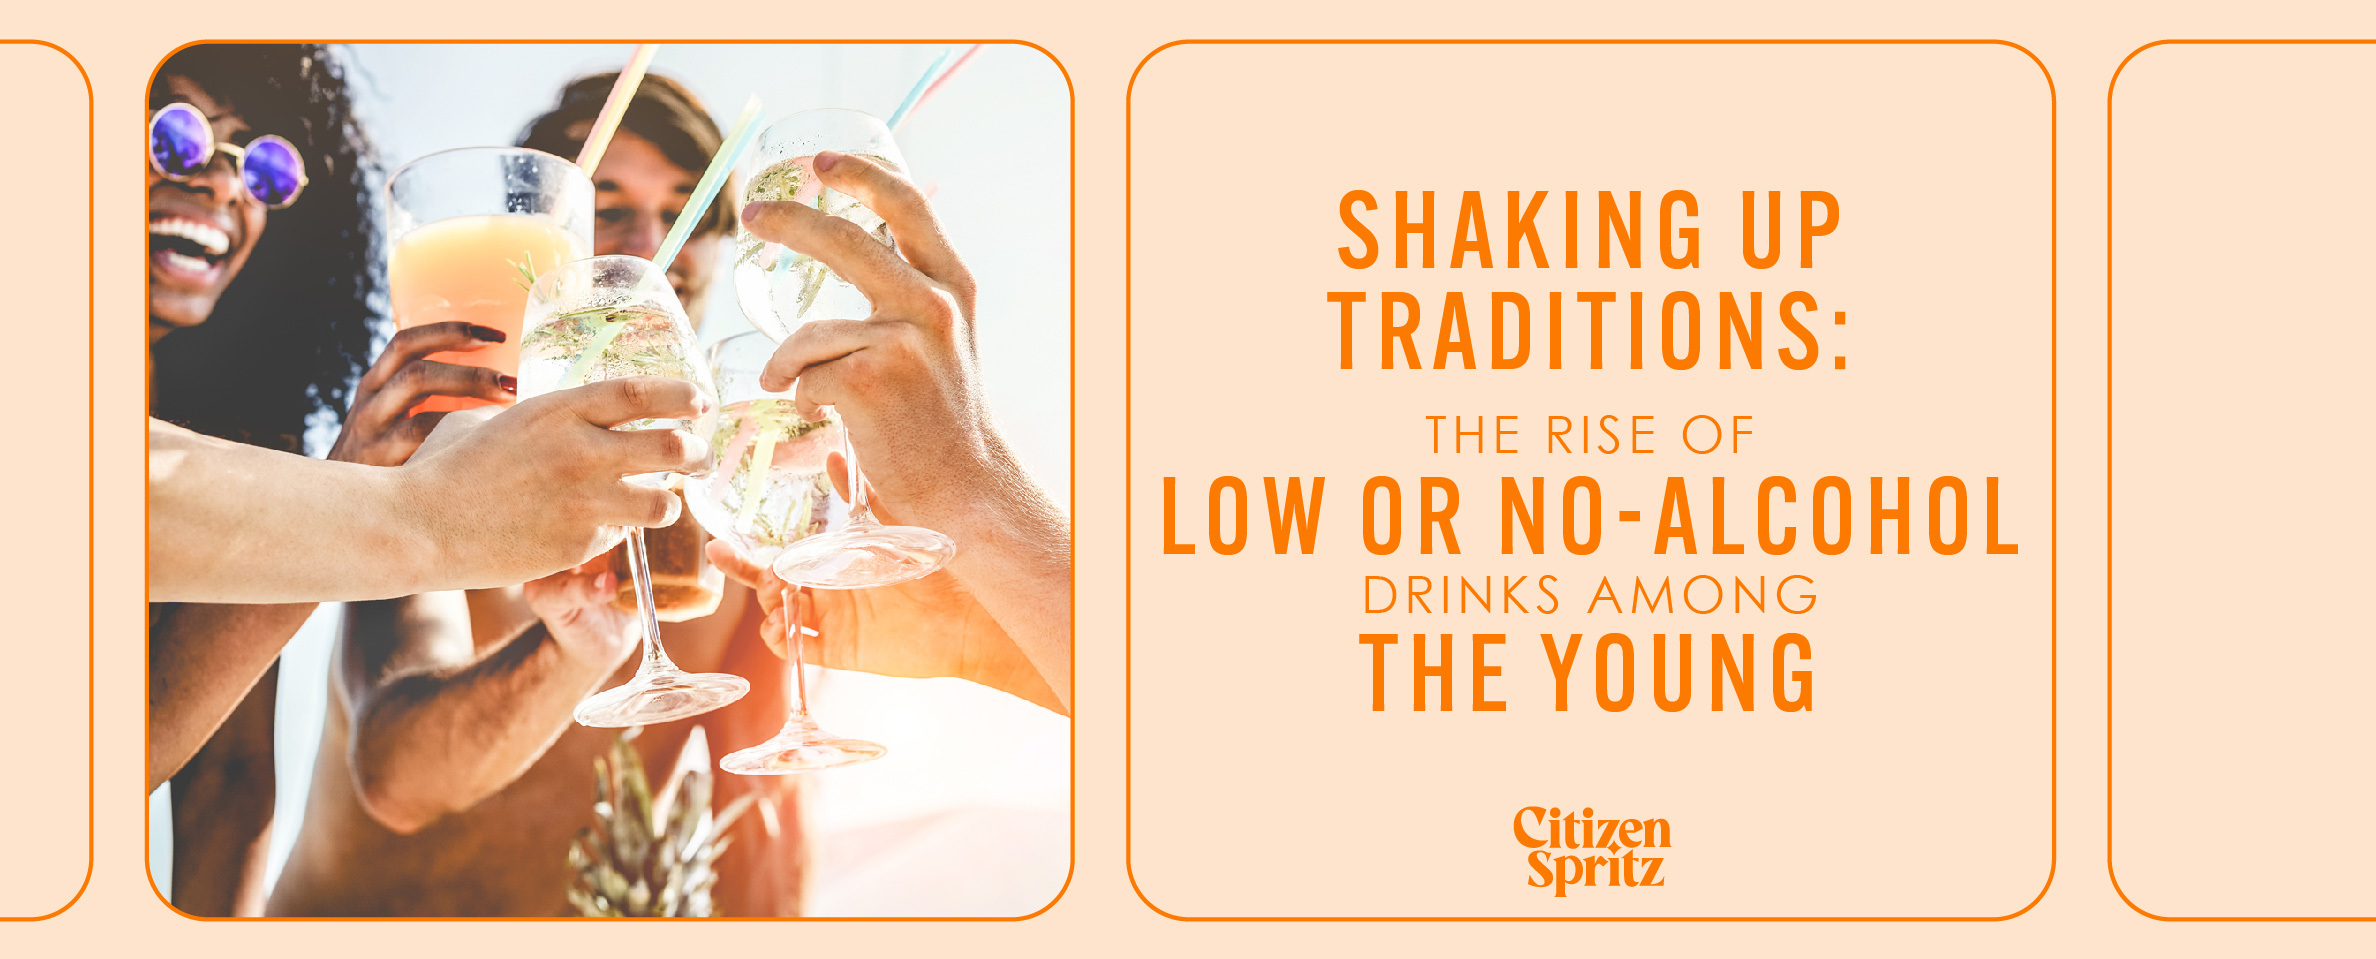 Shaking Up Traditions: The Rise of Low or No-Alcohol Drinks Among the Young